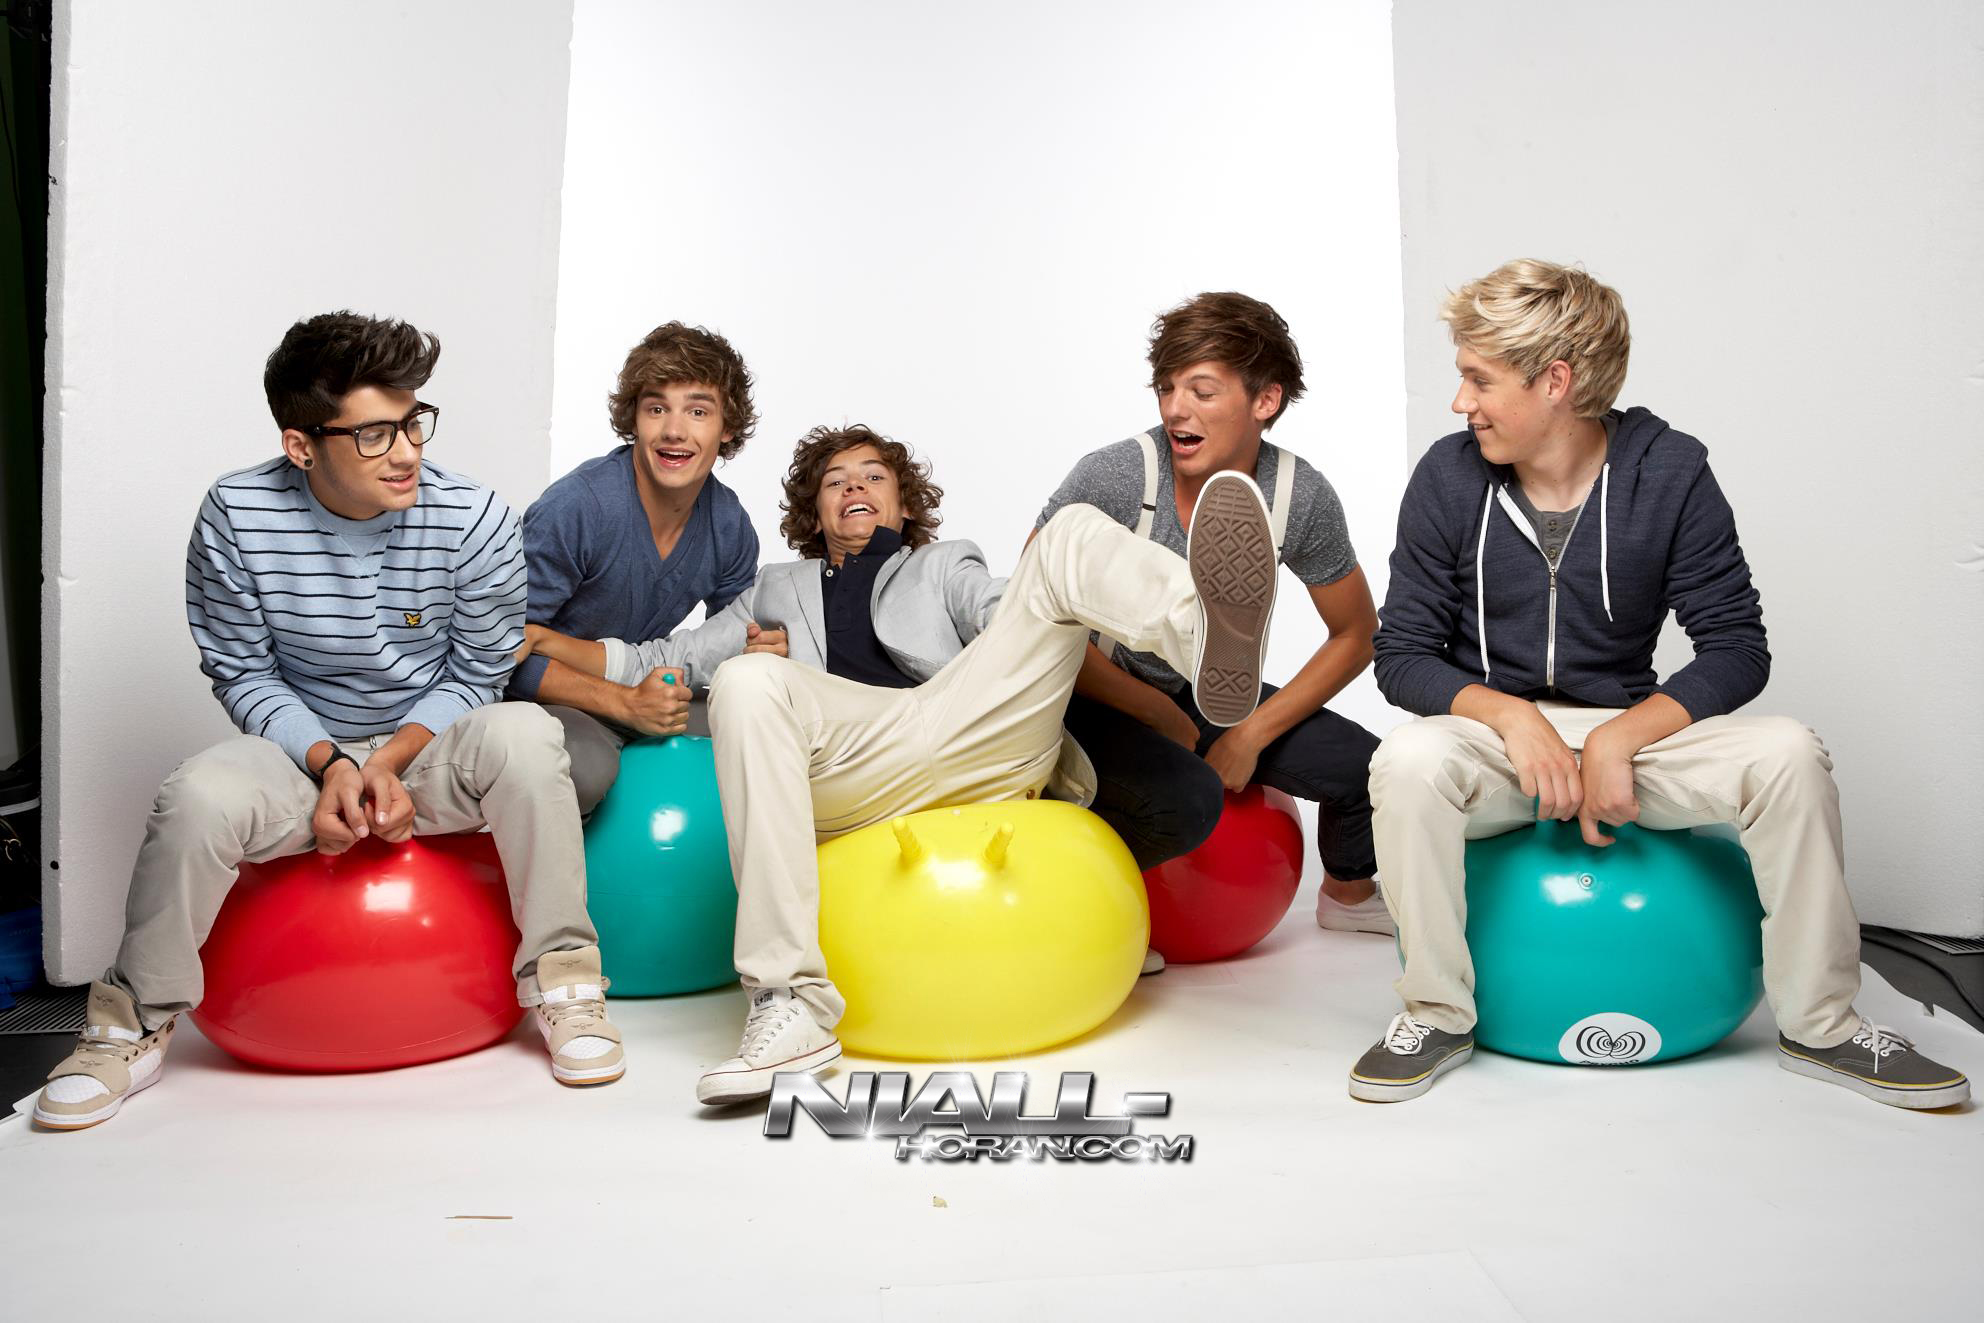 1d Wallpaper One Direction Photo